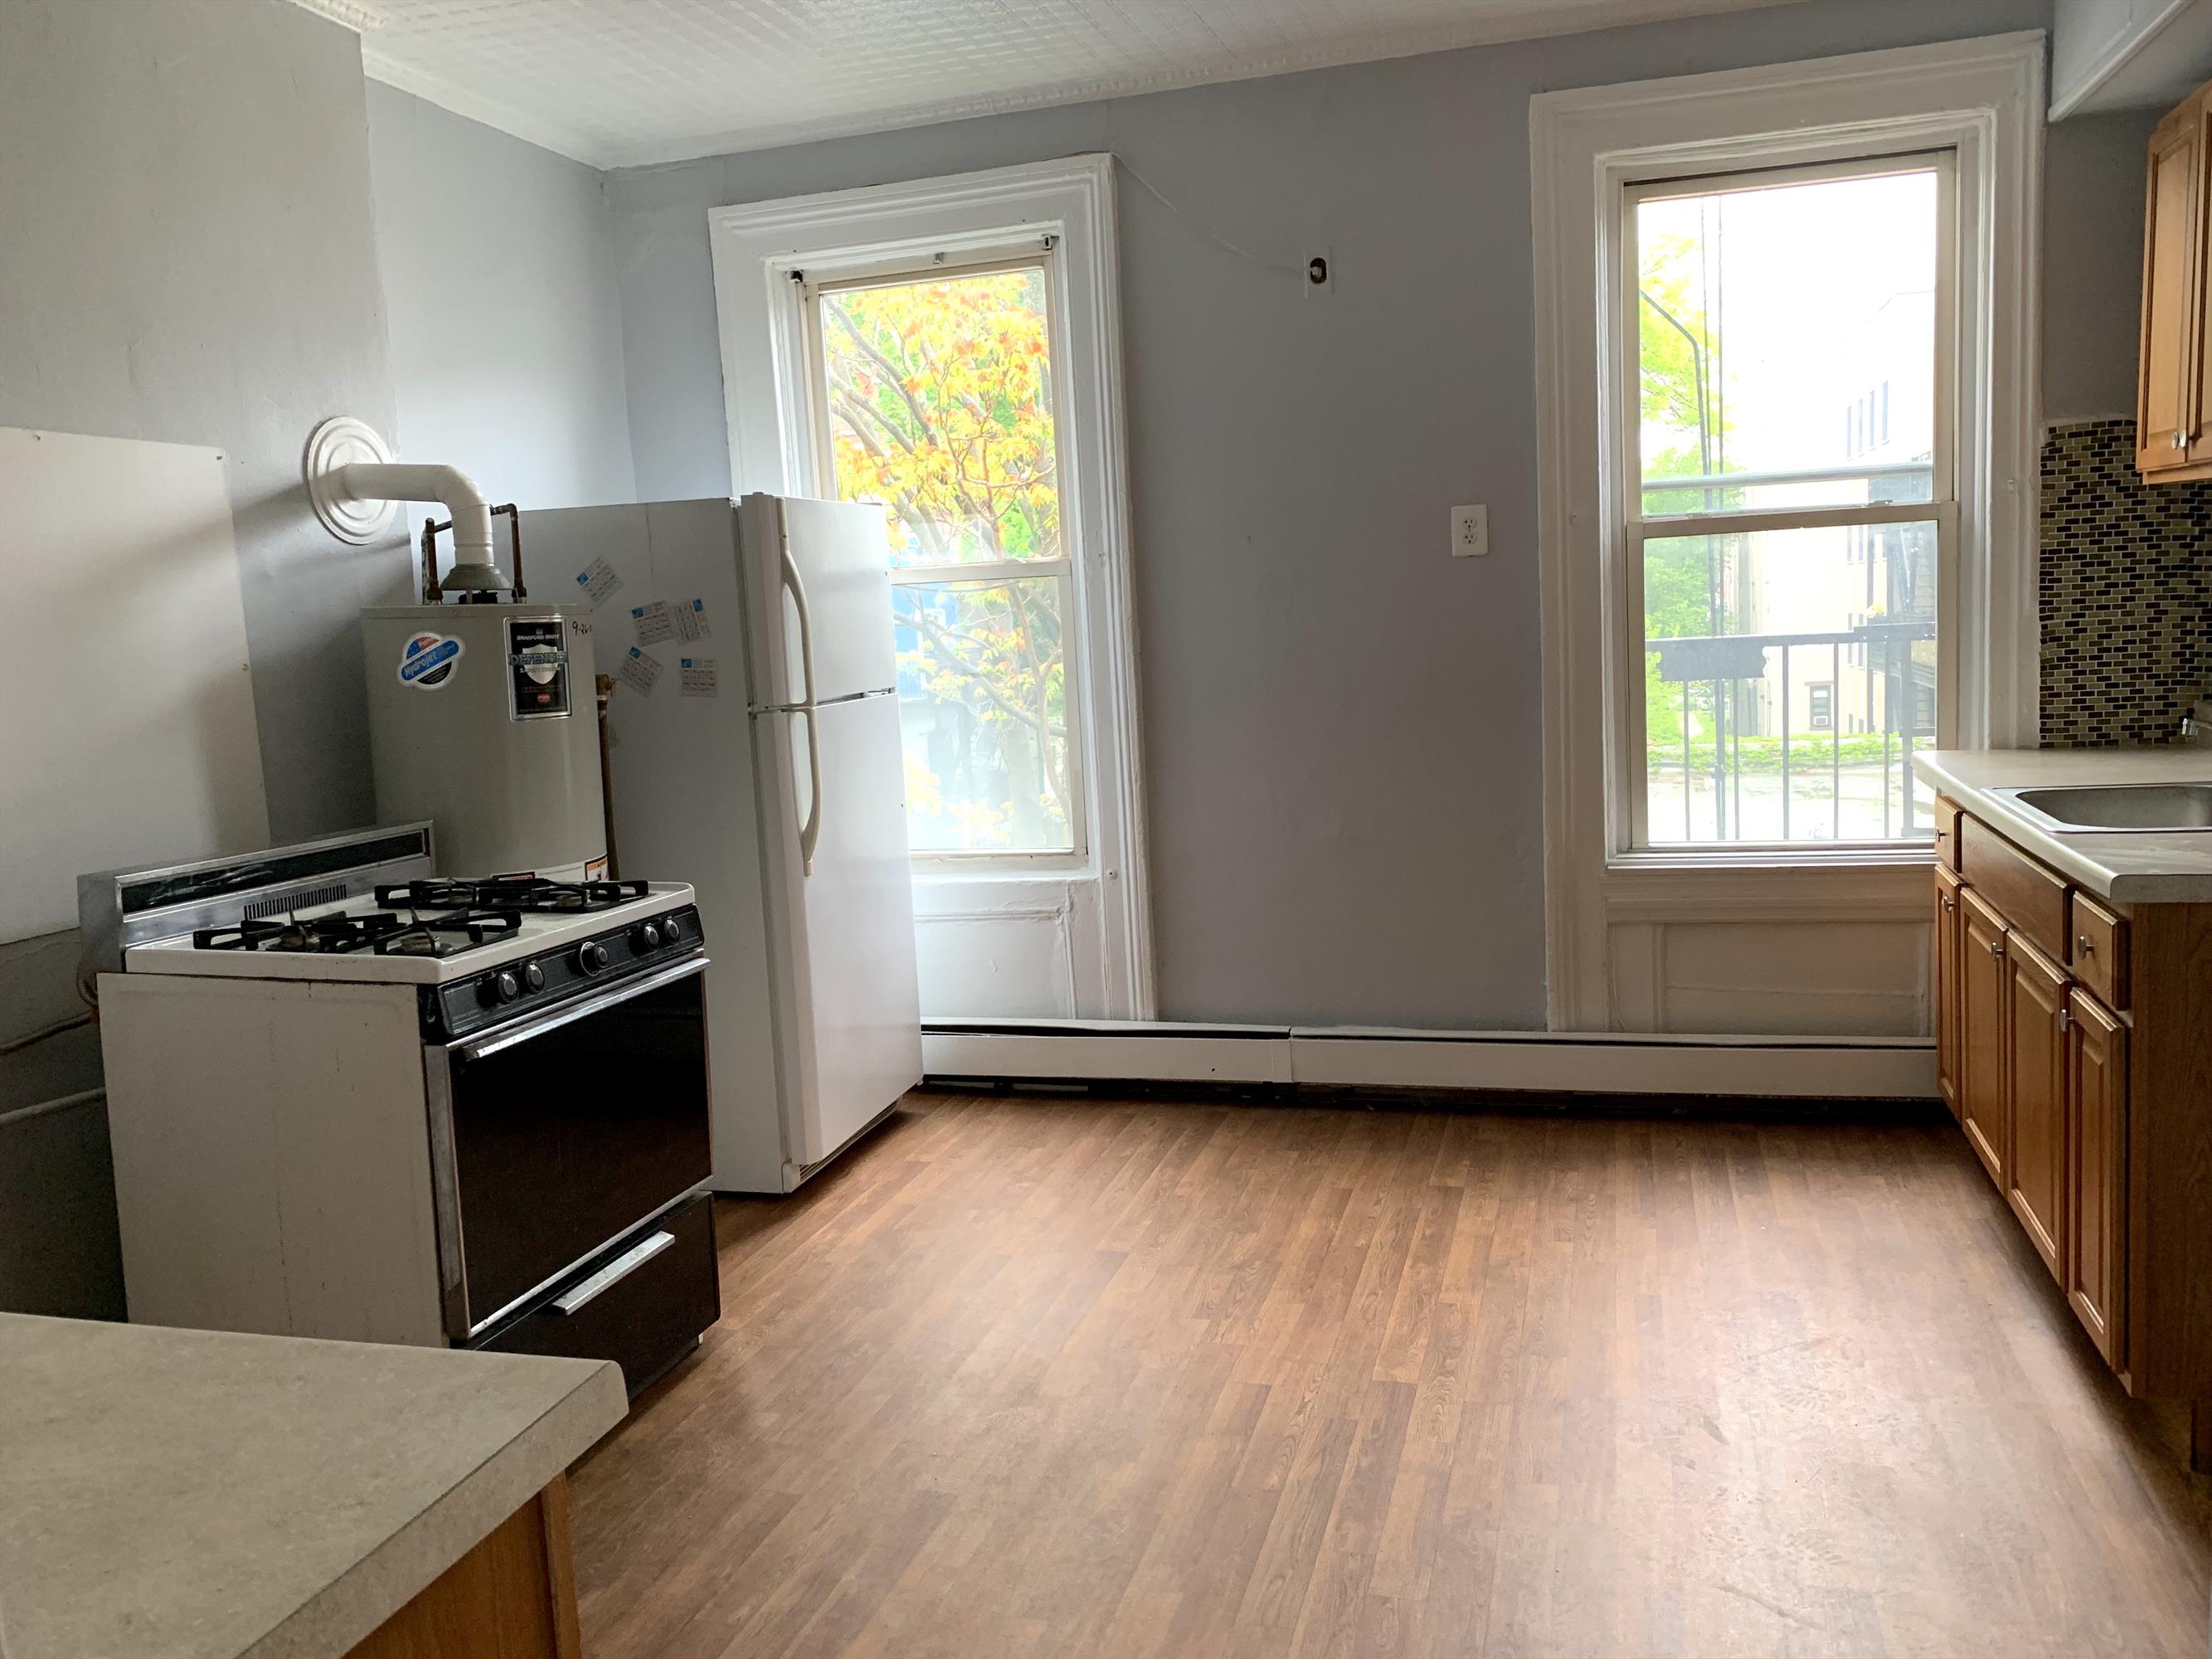 Beautiful 2Bd/1Bth apt plus den, conveniently located on 3rd St Between Park & Willow; Featuring, Wood Cabinetry, Laminate Floors & Heat is Incl. Steps to Transportation to NYC, Shopping, Dining/Bars and Much More. Must See...Won't Last!!!